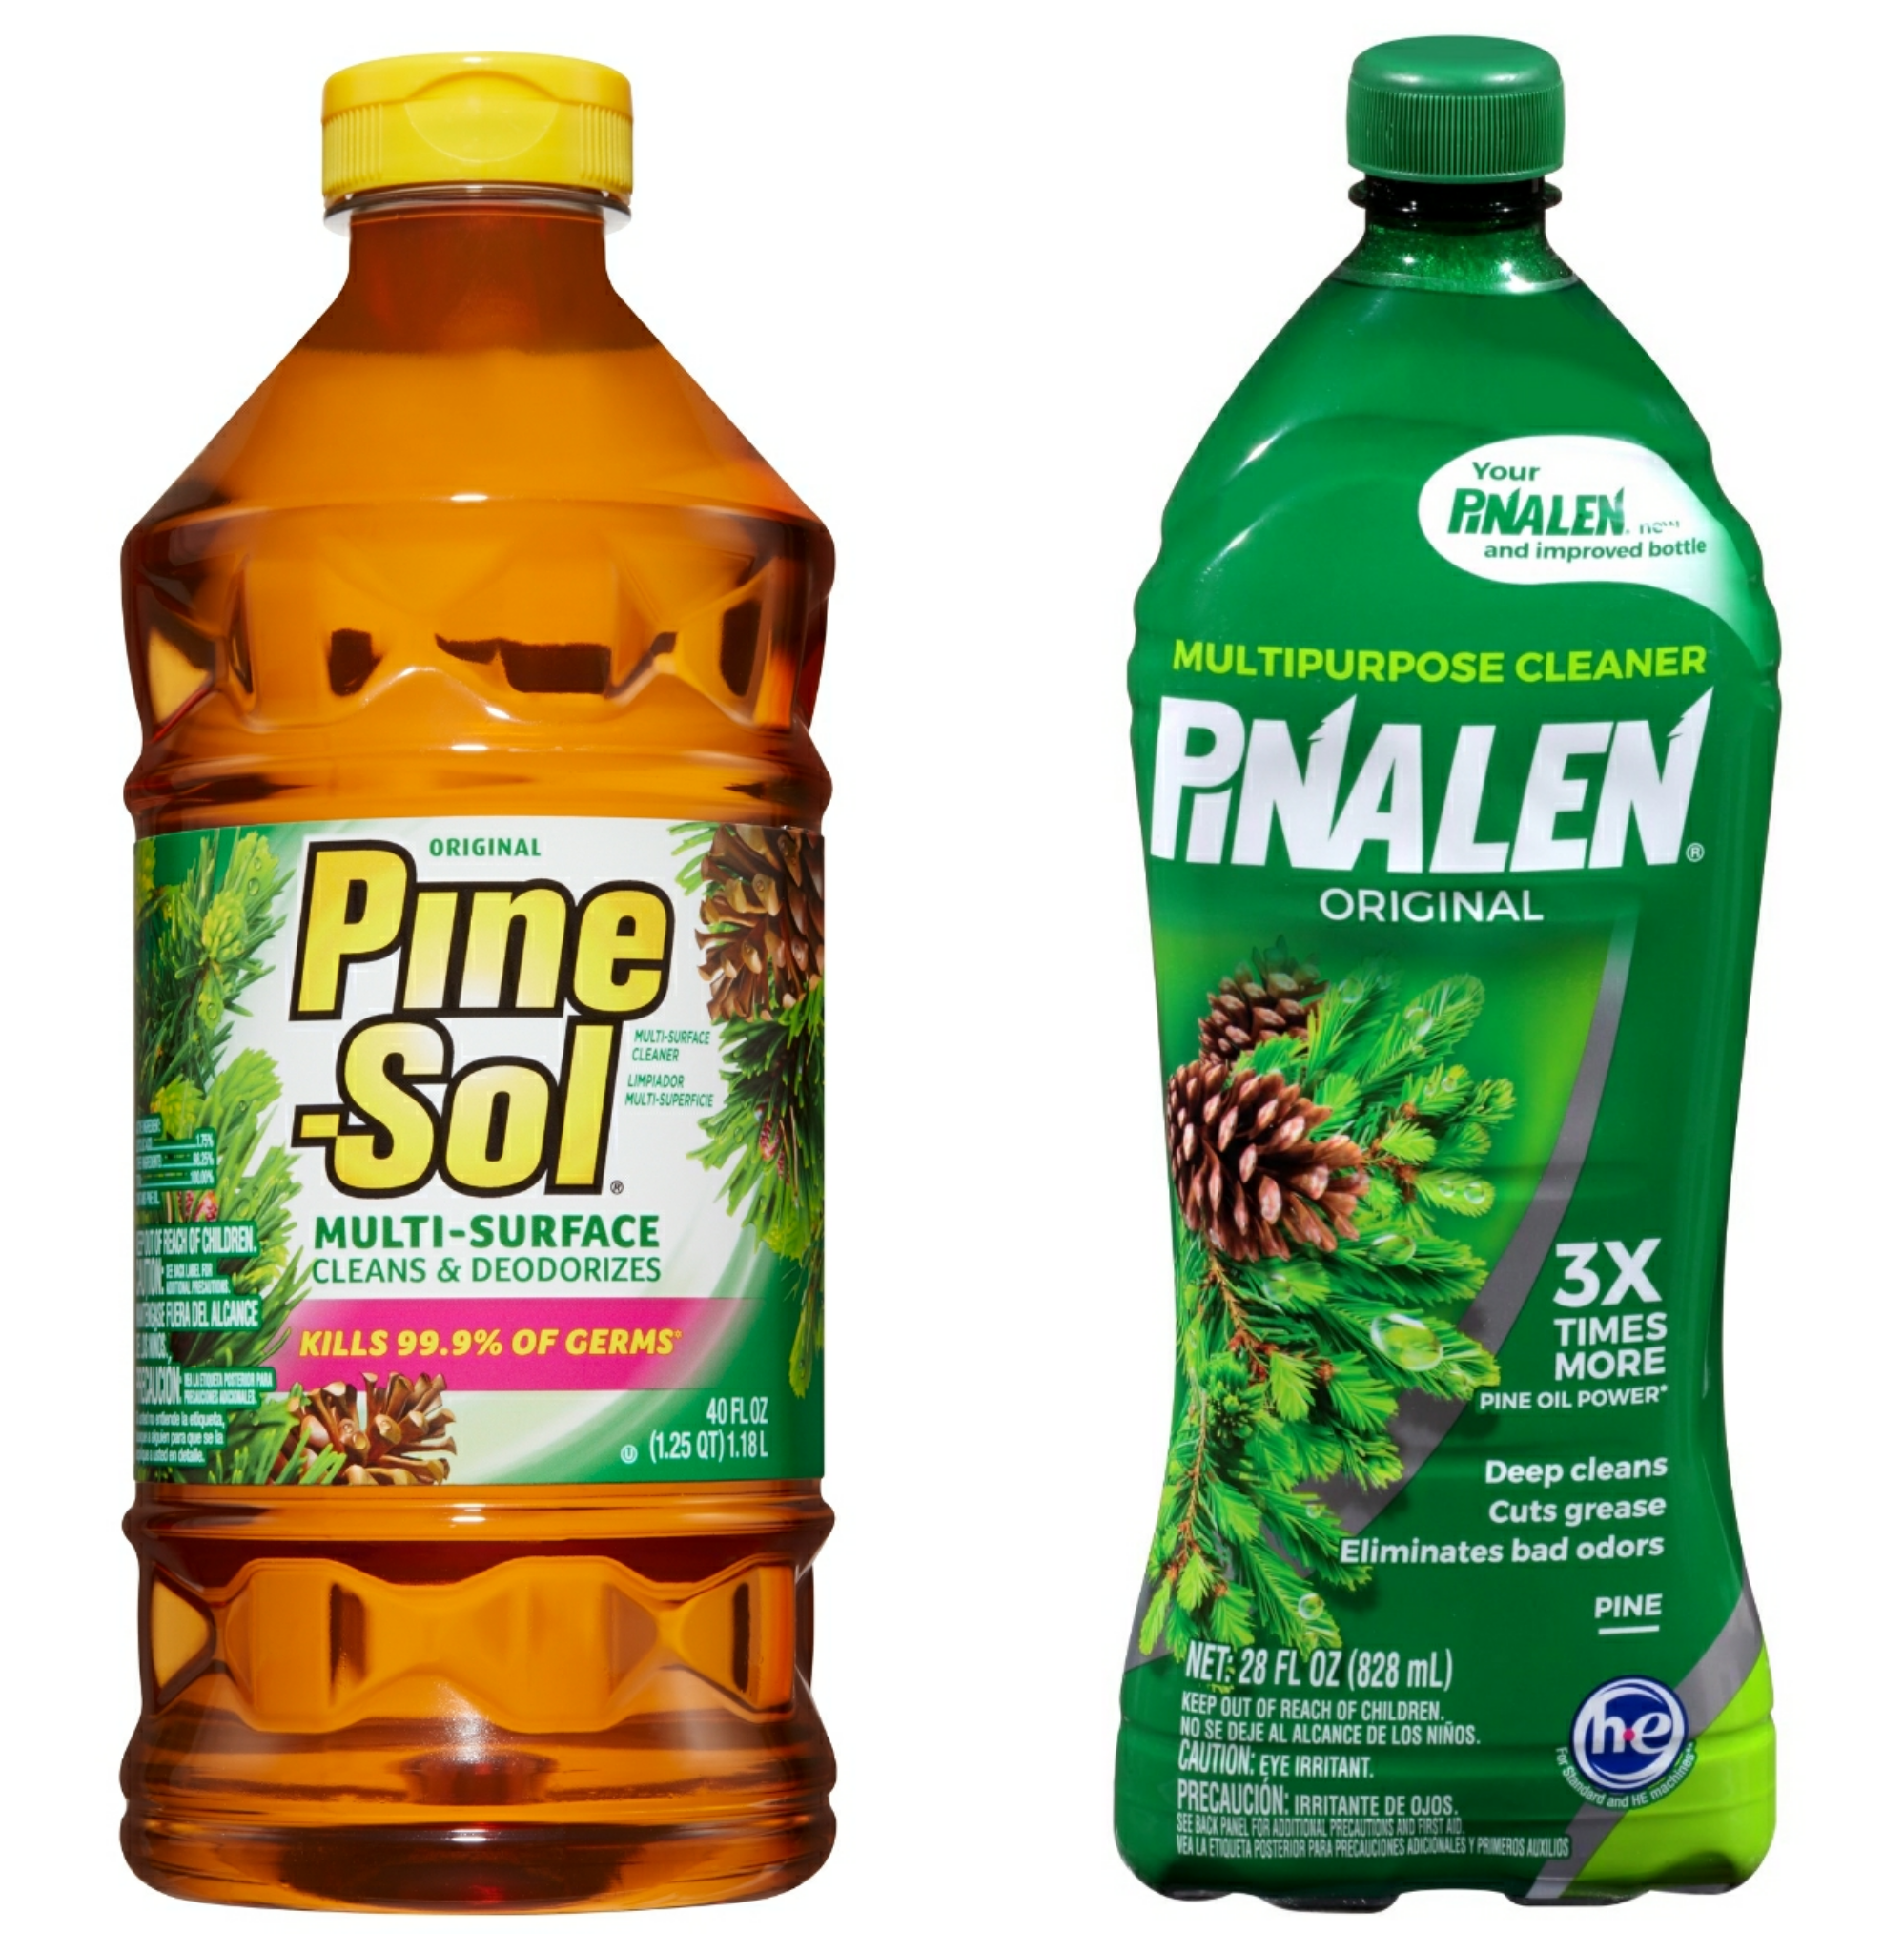 Pine Sol In The Wash For Love Of, Is Pine Sol Safe For Laminate Floors